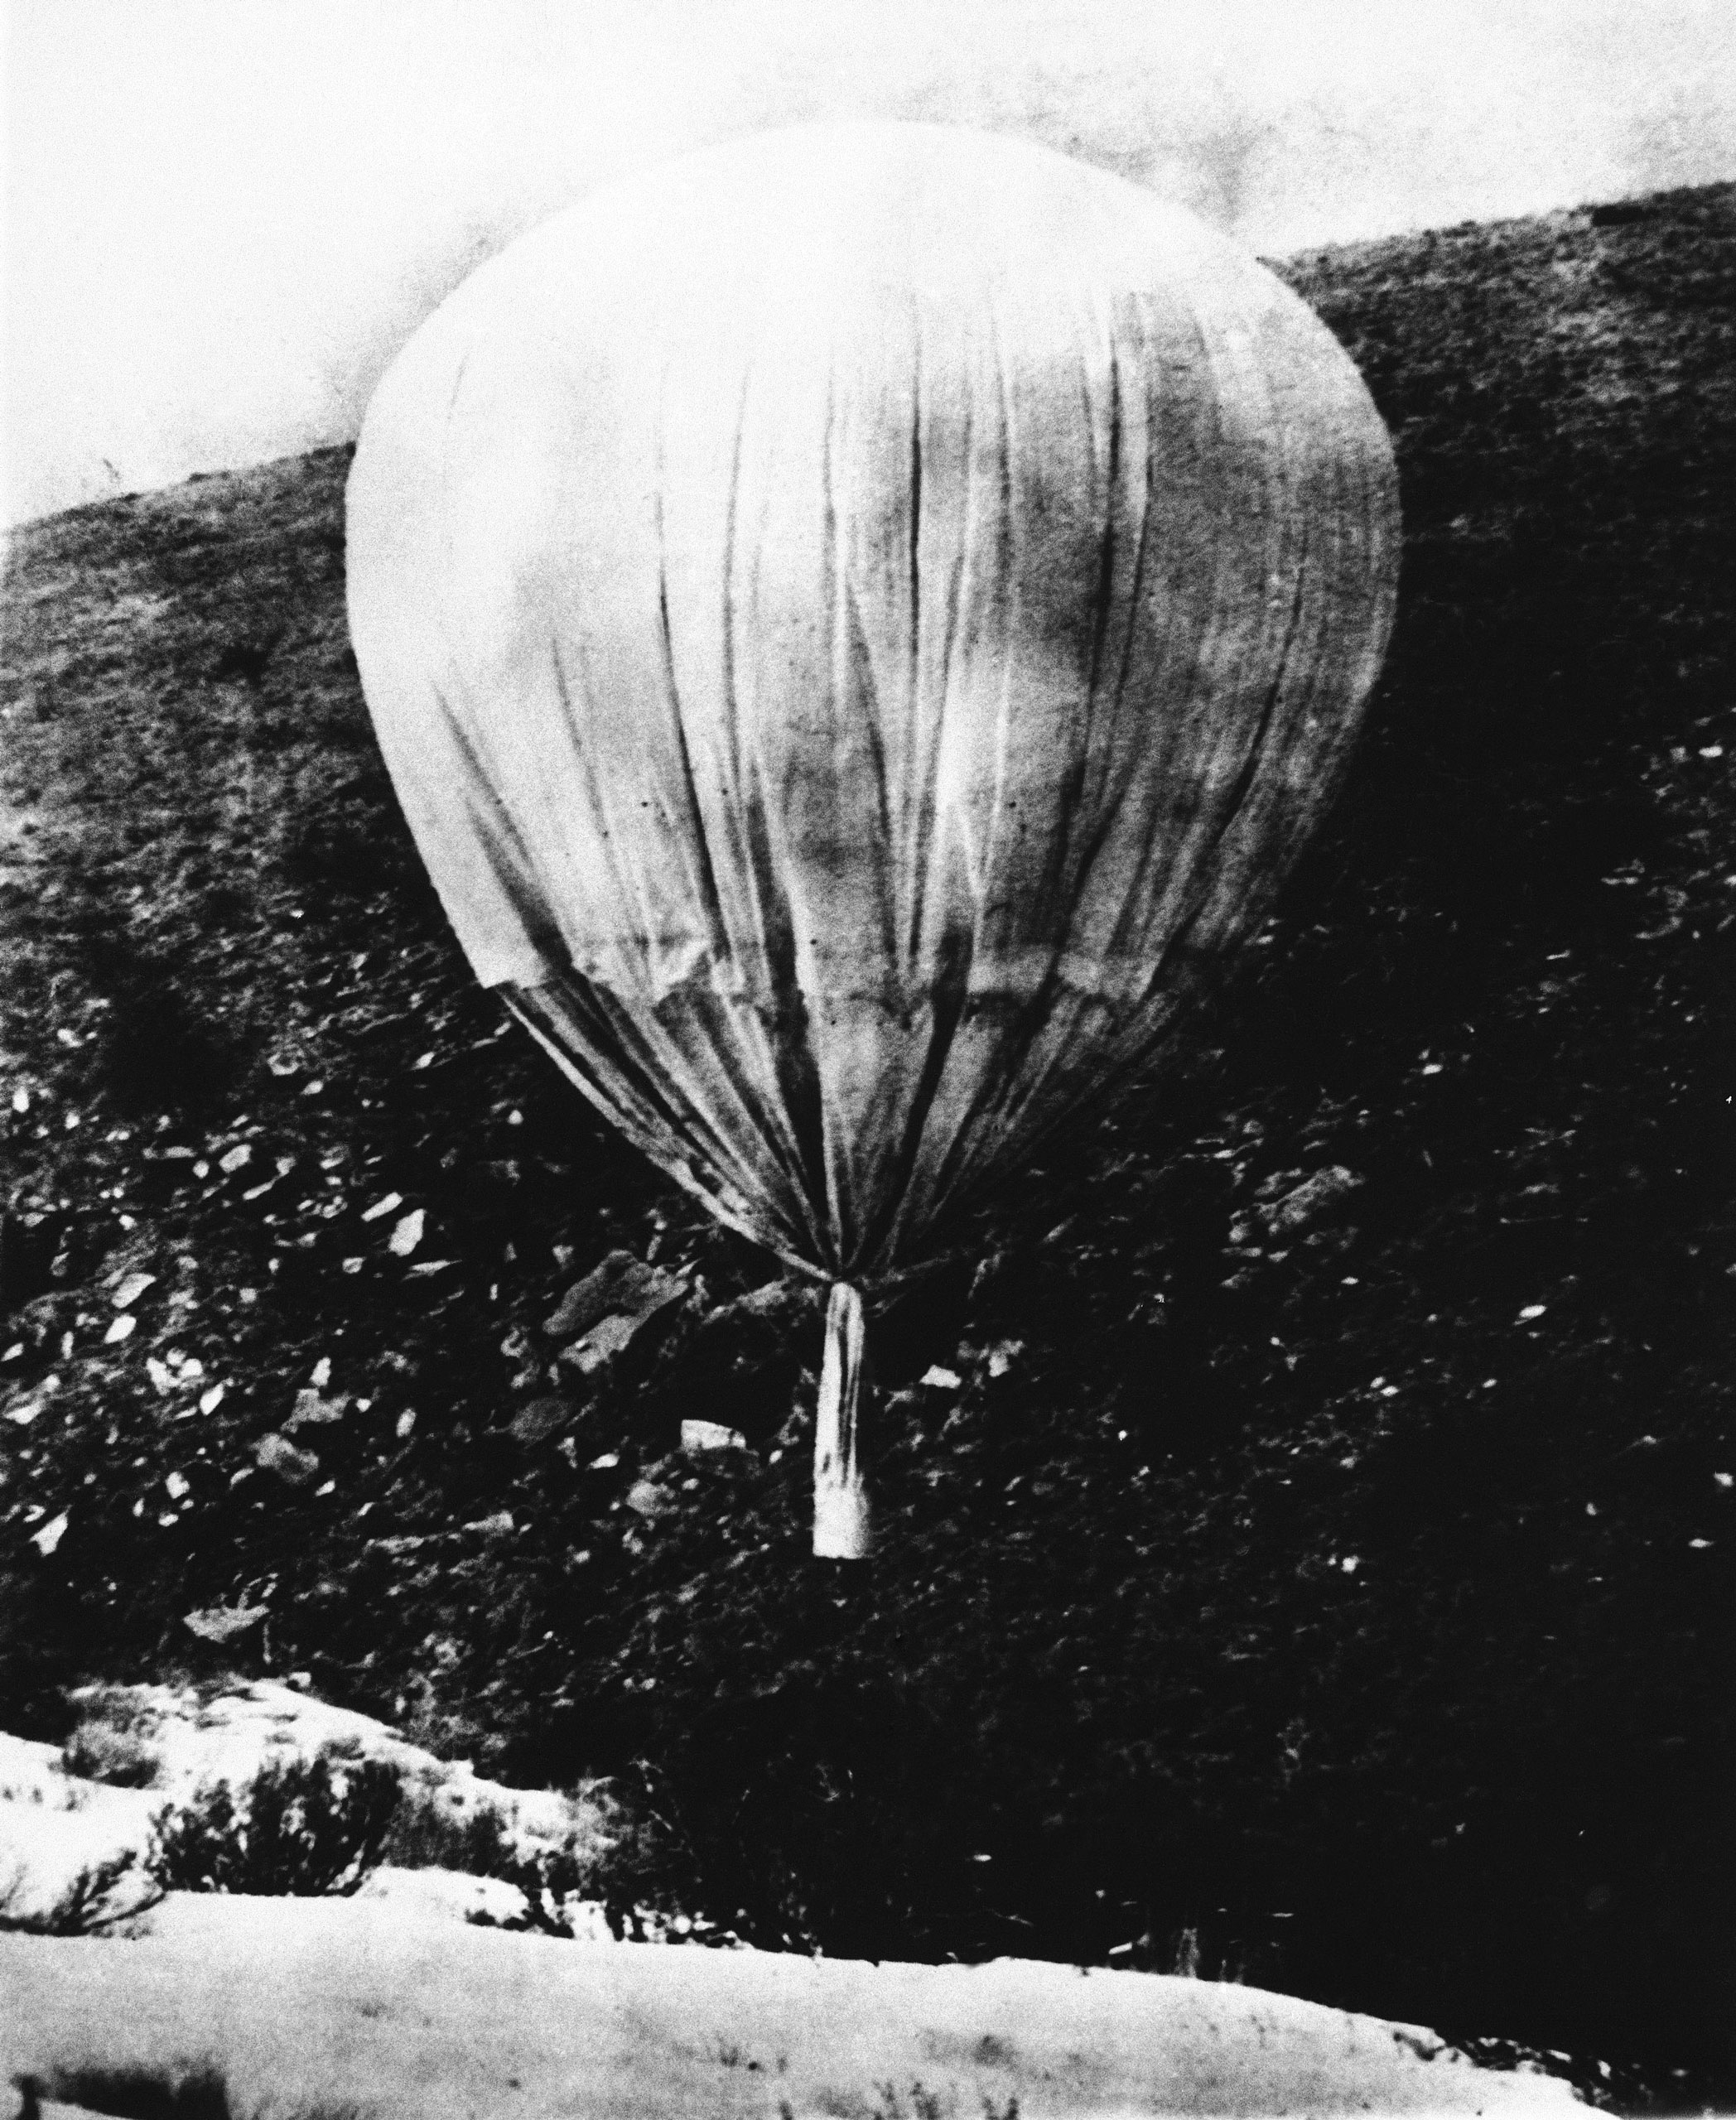 This photograph of a Japanese bomb-carrying paper balloon in the air was taken over North America on July 2, 1945. The balloons are supposed to blow themselves up after releasing anti-personnel and incendiary explosives. (AP)